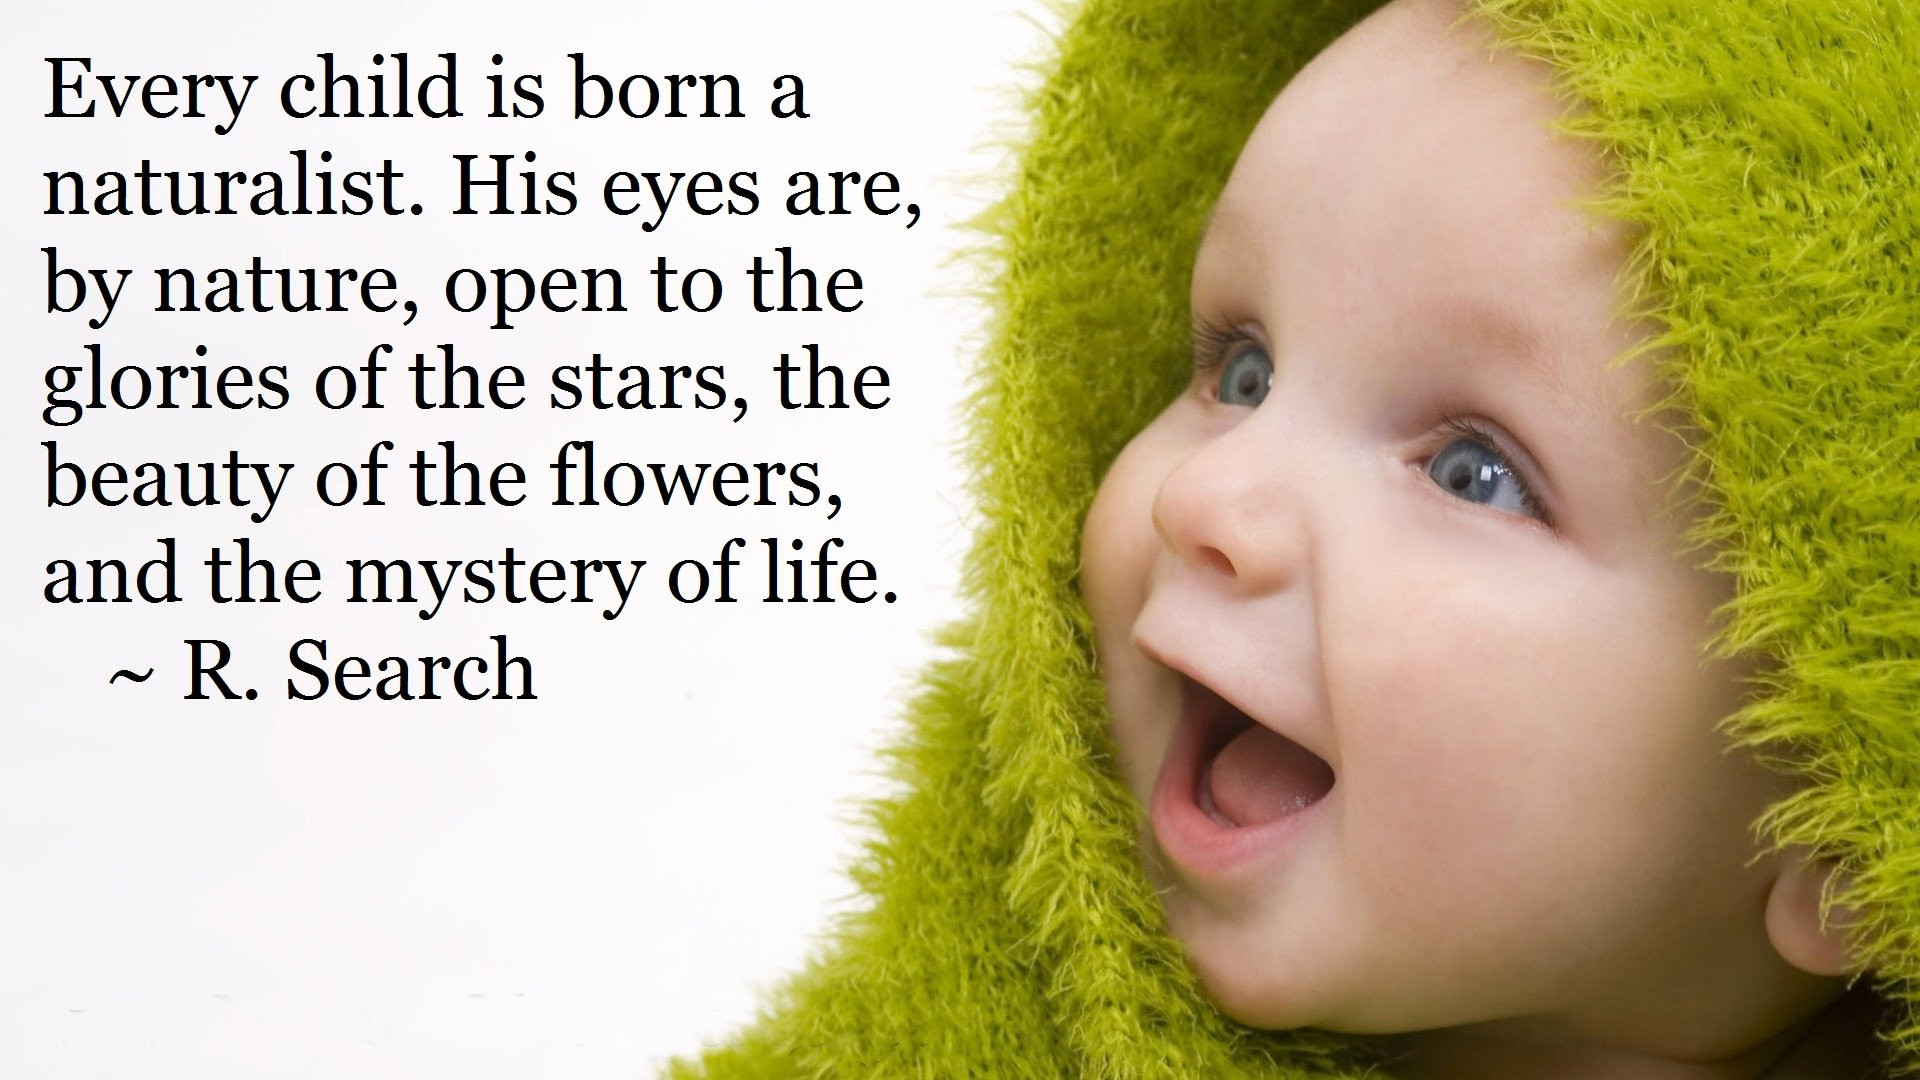 Babies Wallpapers With Quotes Cute Baby Wallpapers With Quotes, 45 Full Hd Quality Cute Baby